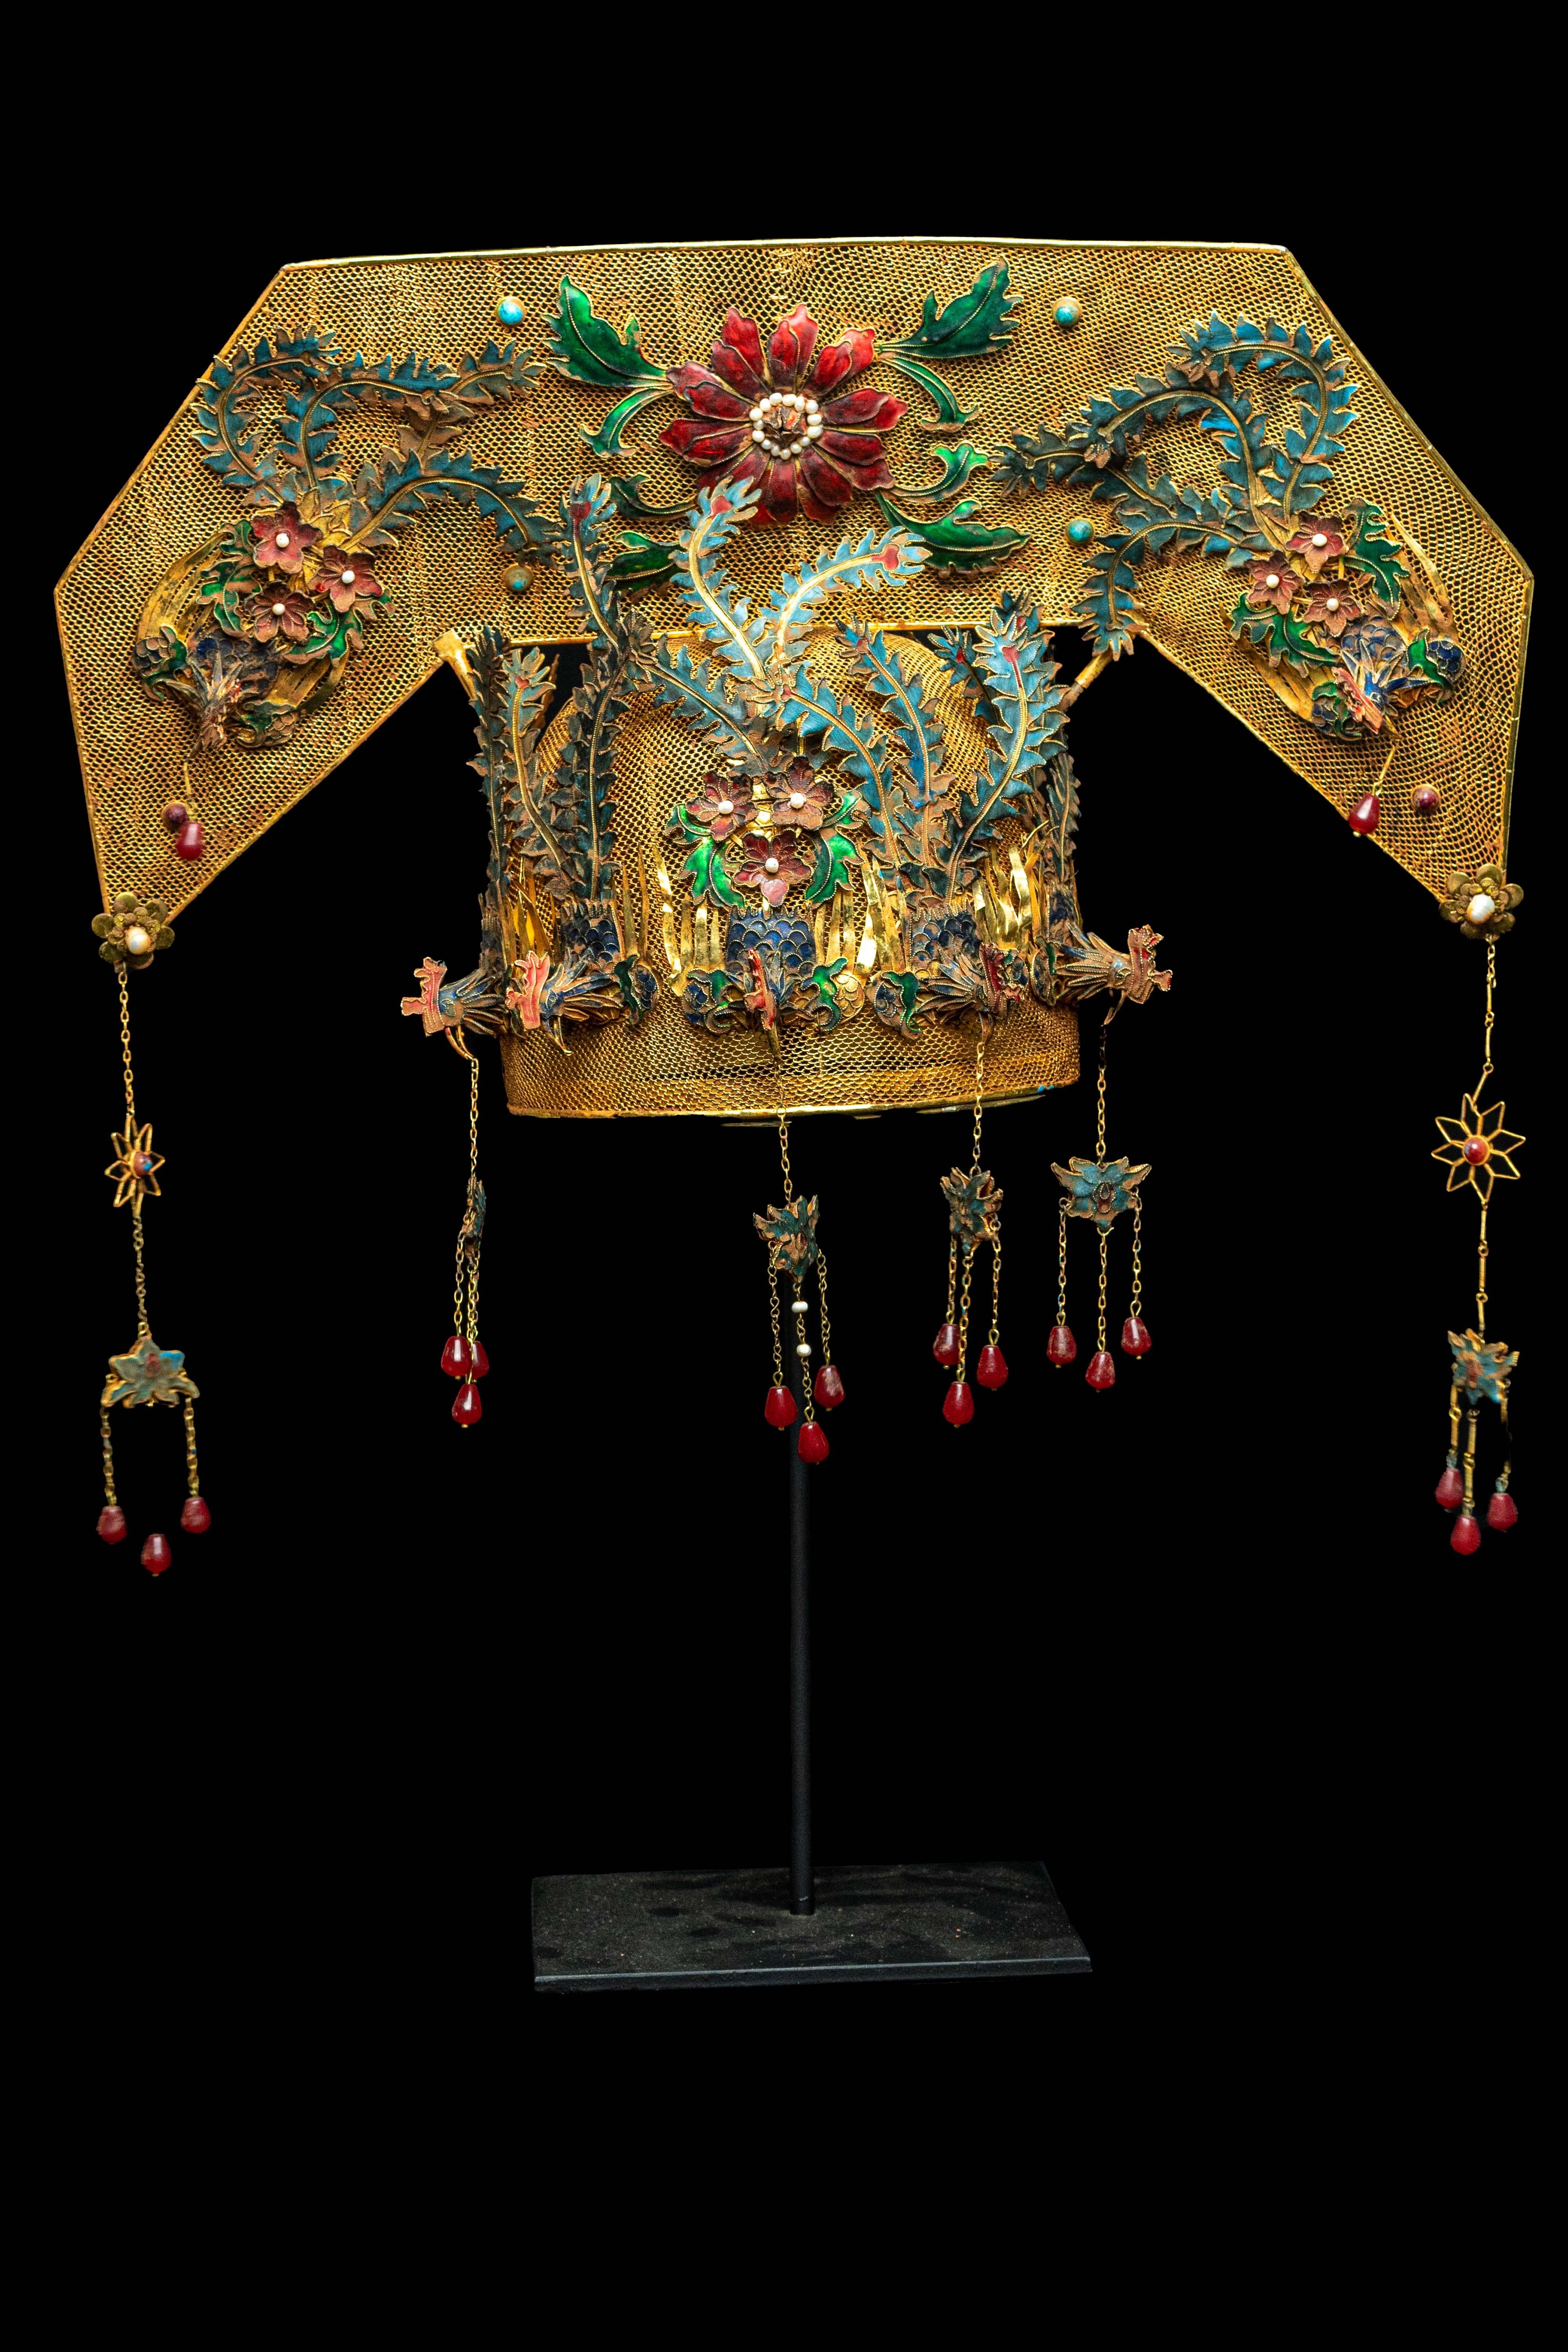 Chinese Opera Theatre Headdress, rose fan. Chinese opera theatre headdress in turquoise enamel with red ruby ornamentation, mid-20th century, mounted on a custom black painted metal base. 21.5